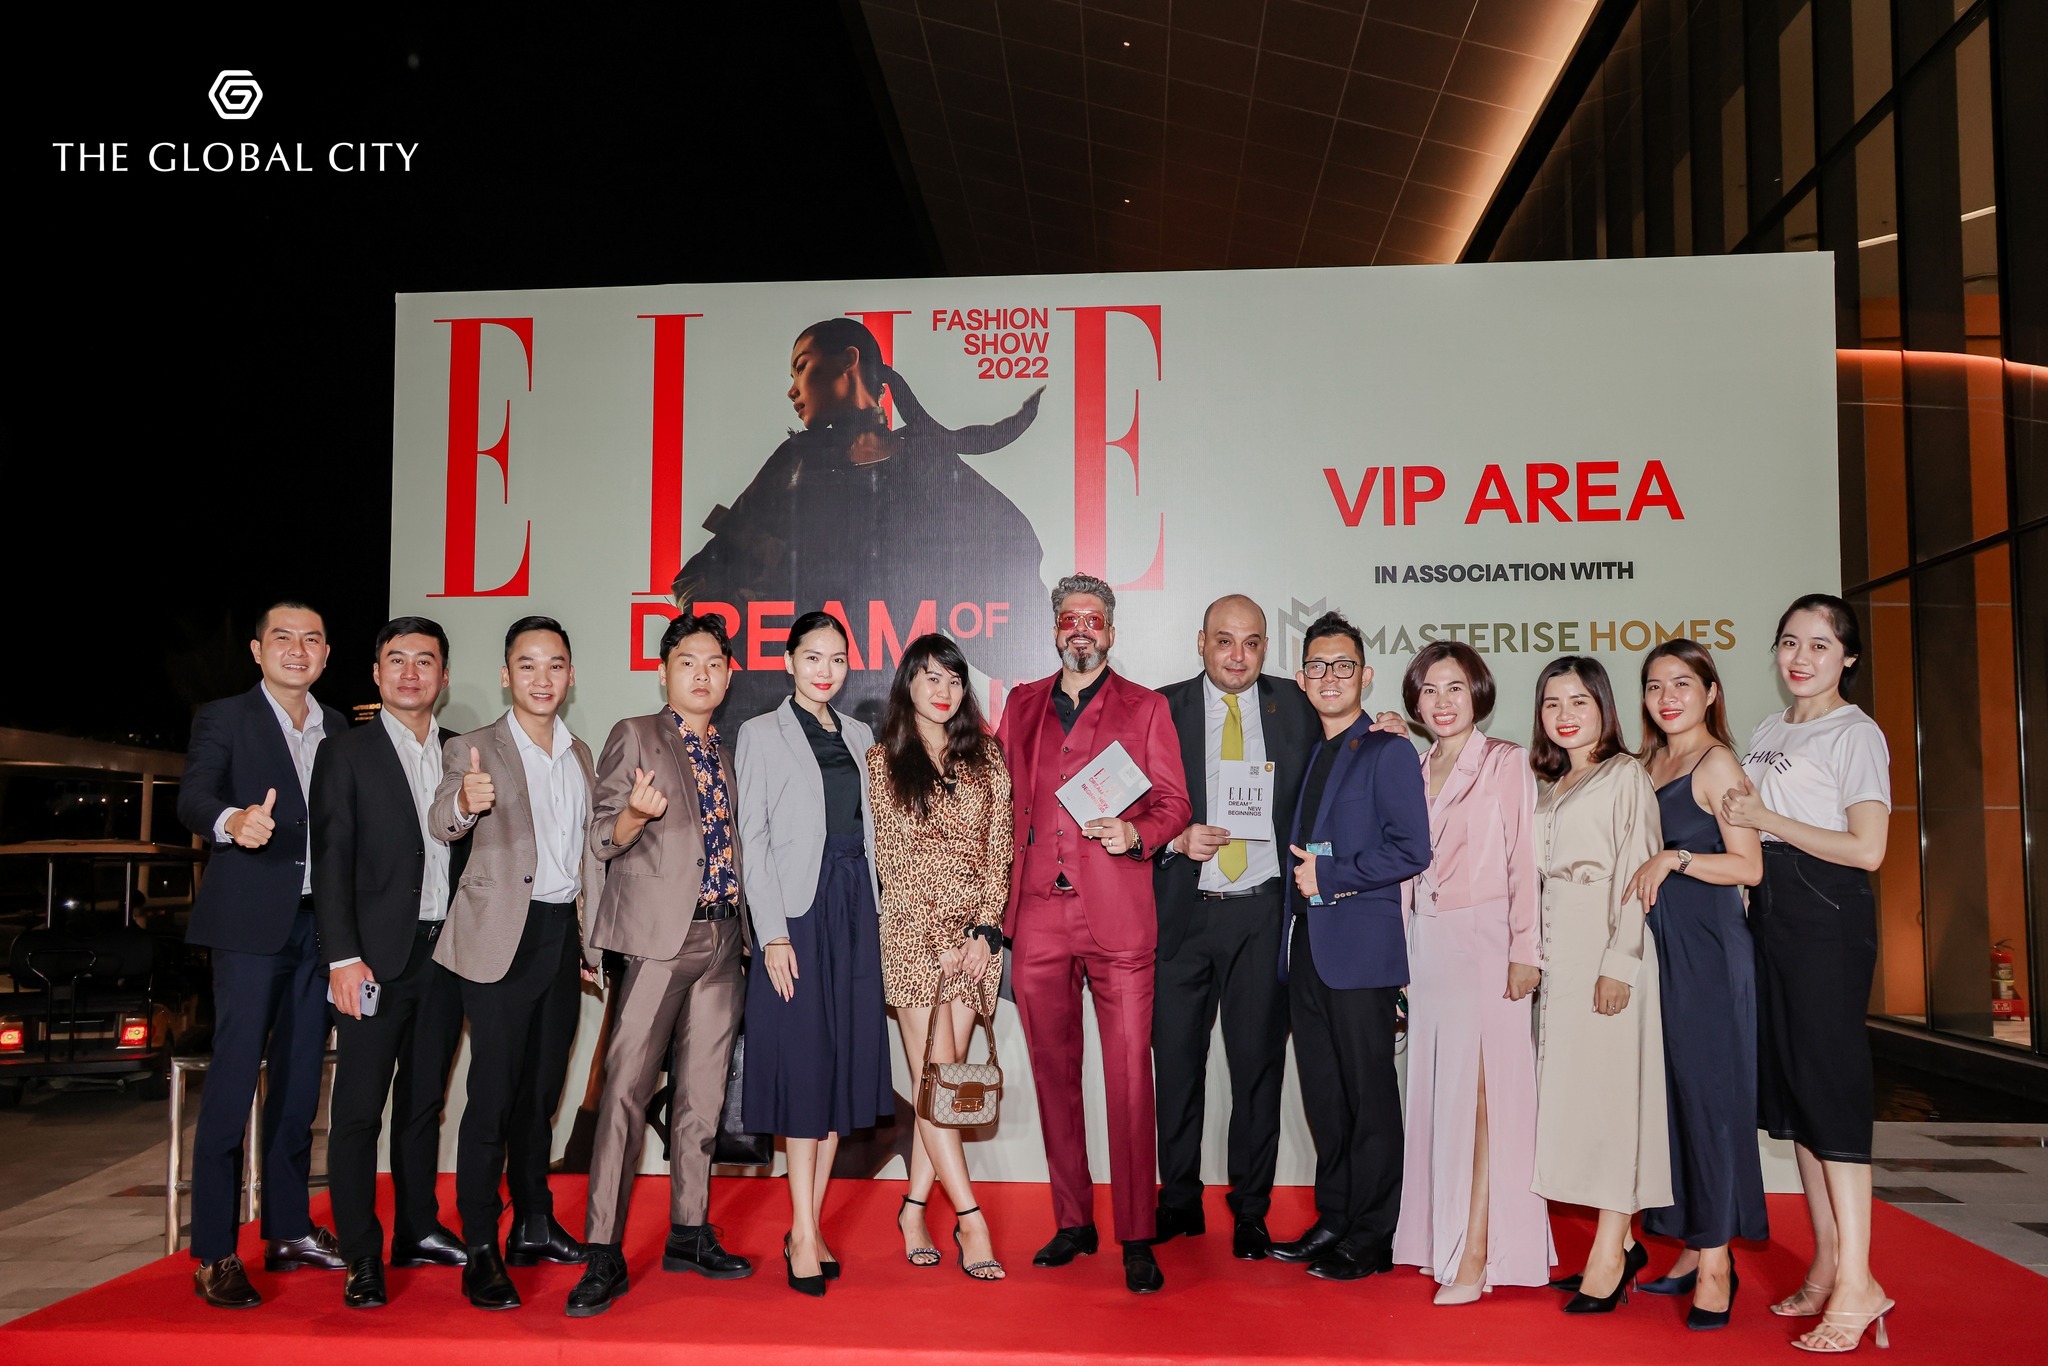 ELLE FASHION SHOW MAKES A SIGN WITH MORE THAN 1,000 GUESTS, ARTISTS GET IN THE NEW CENTER THE GLOBAL CITY